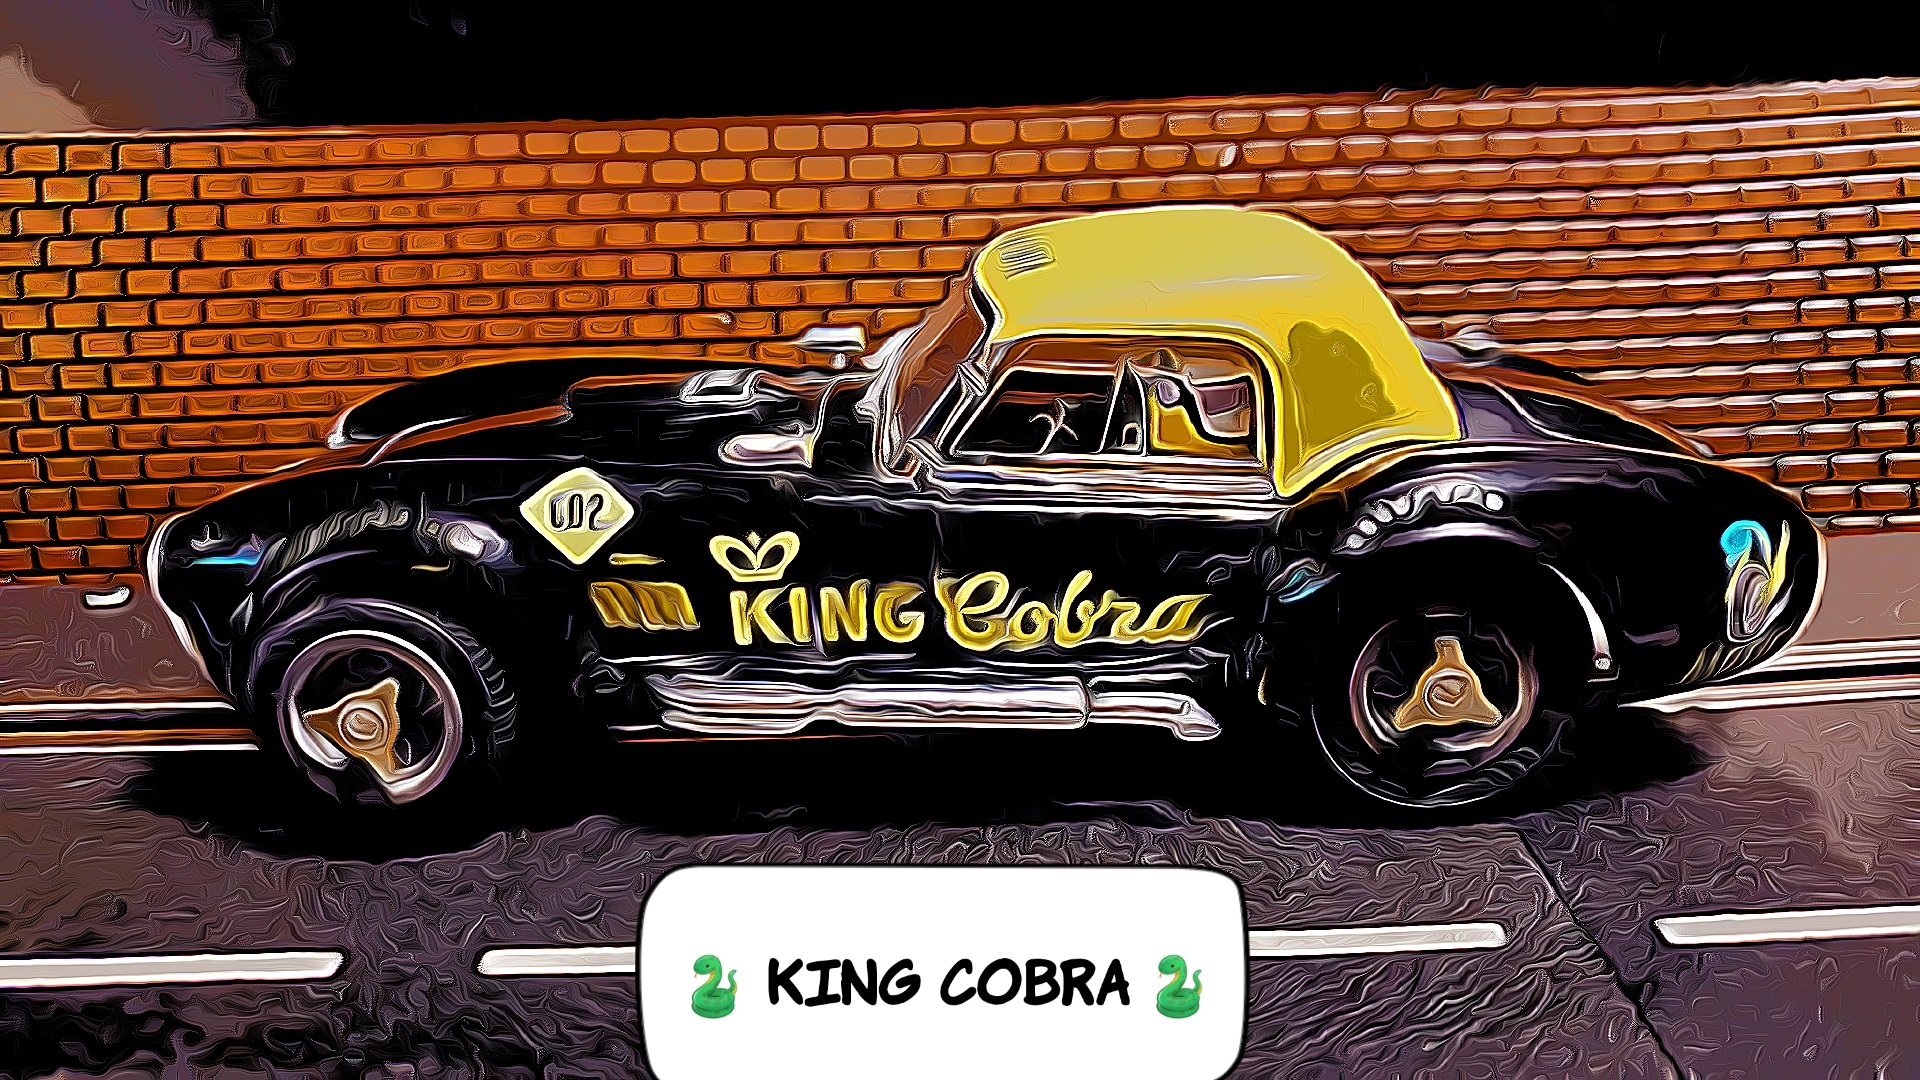 * SOLD * * SALE * COX 1965 Shelby King Cobra 427 Motion Performance 🐍 "King Cobra" 🐍 Racer 1:24 Scale Slot Car